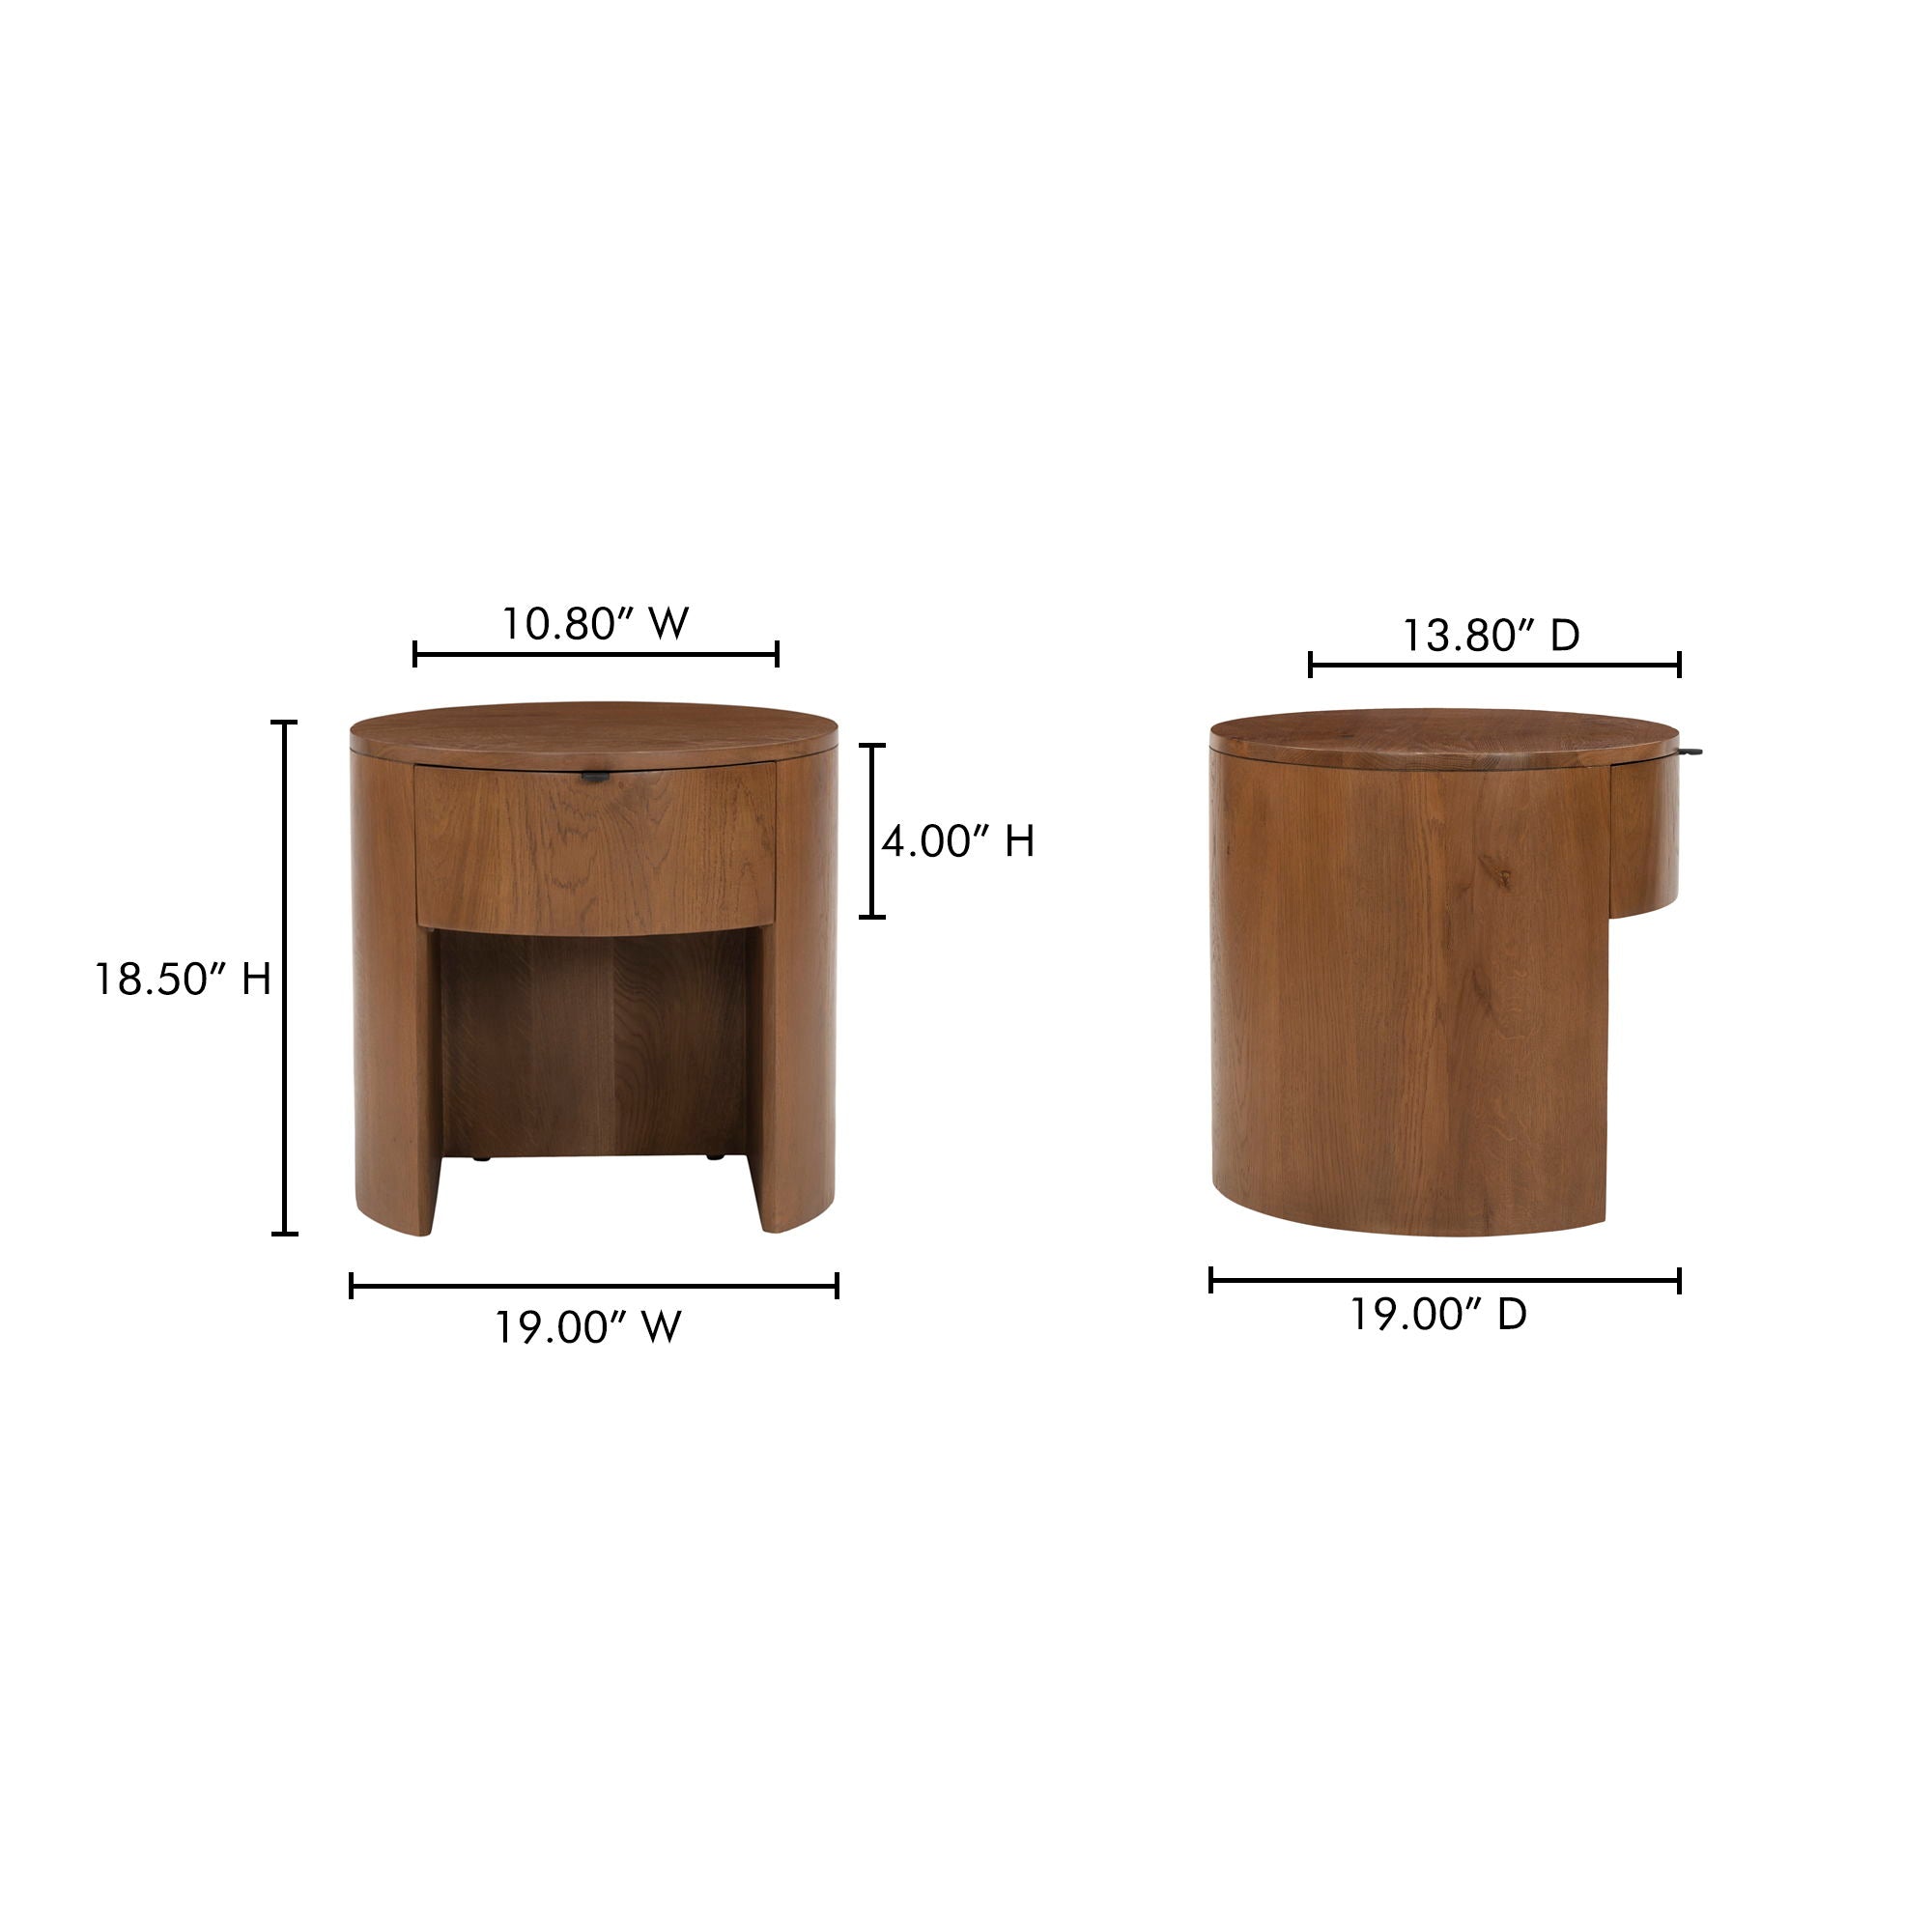 Theo - One Drawer Nightstand - Brown